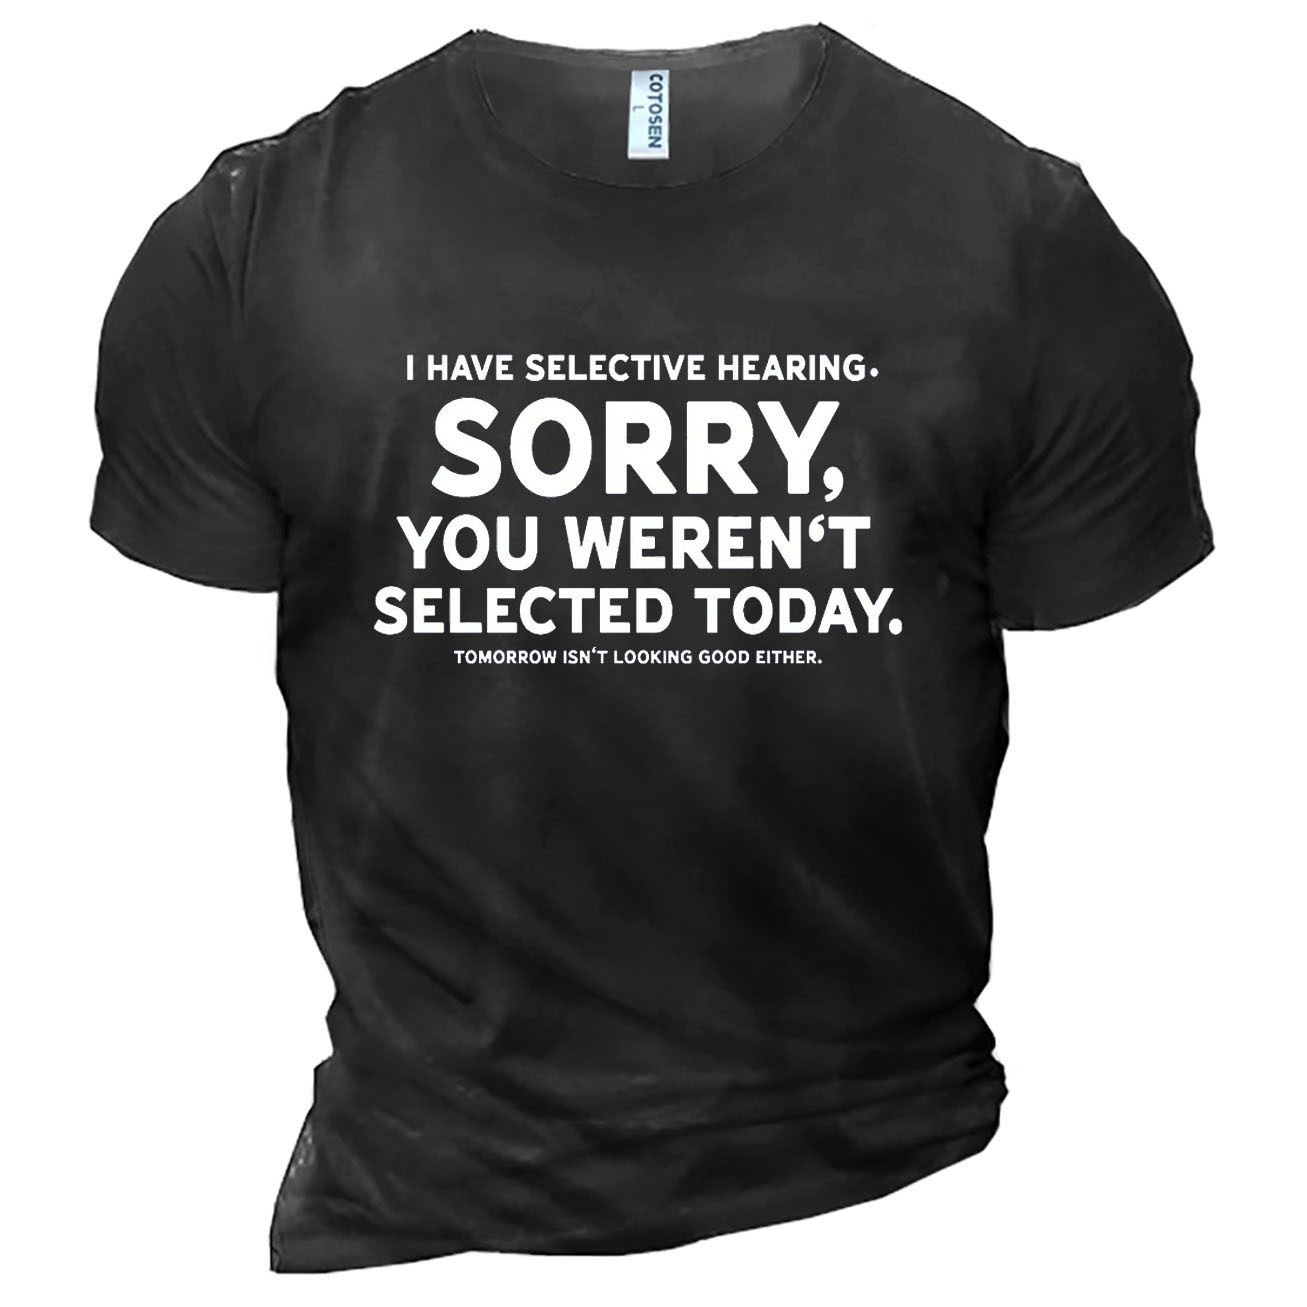 Men's I Have Selective Chic Hearing Sorry You Weren't Selected Today Cotton T-shirt